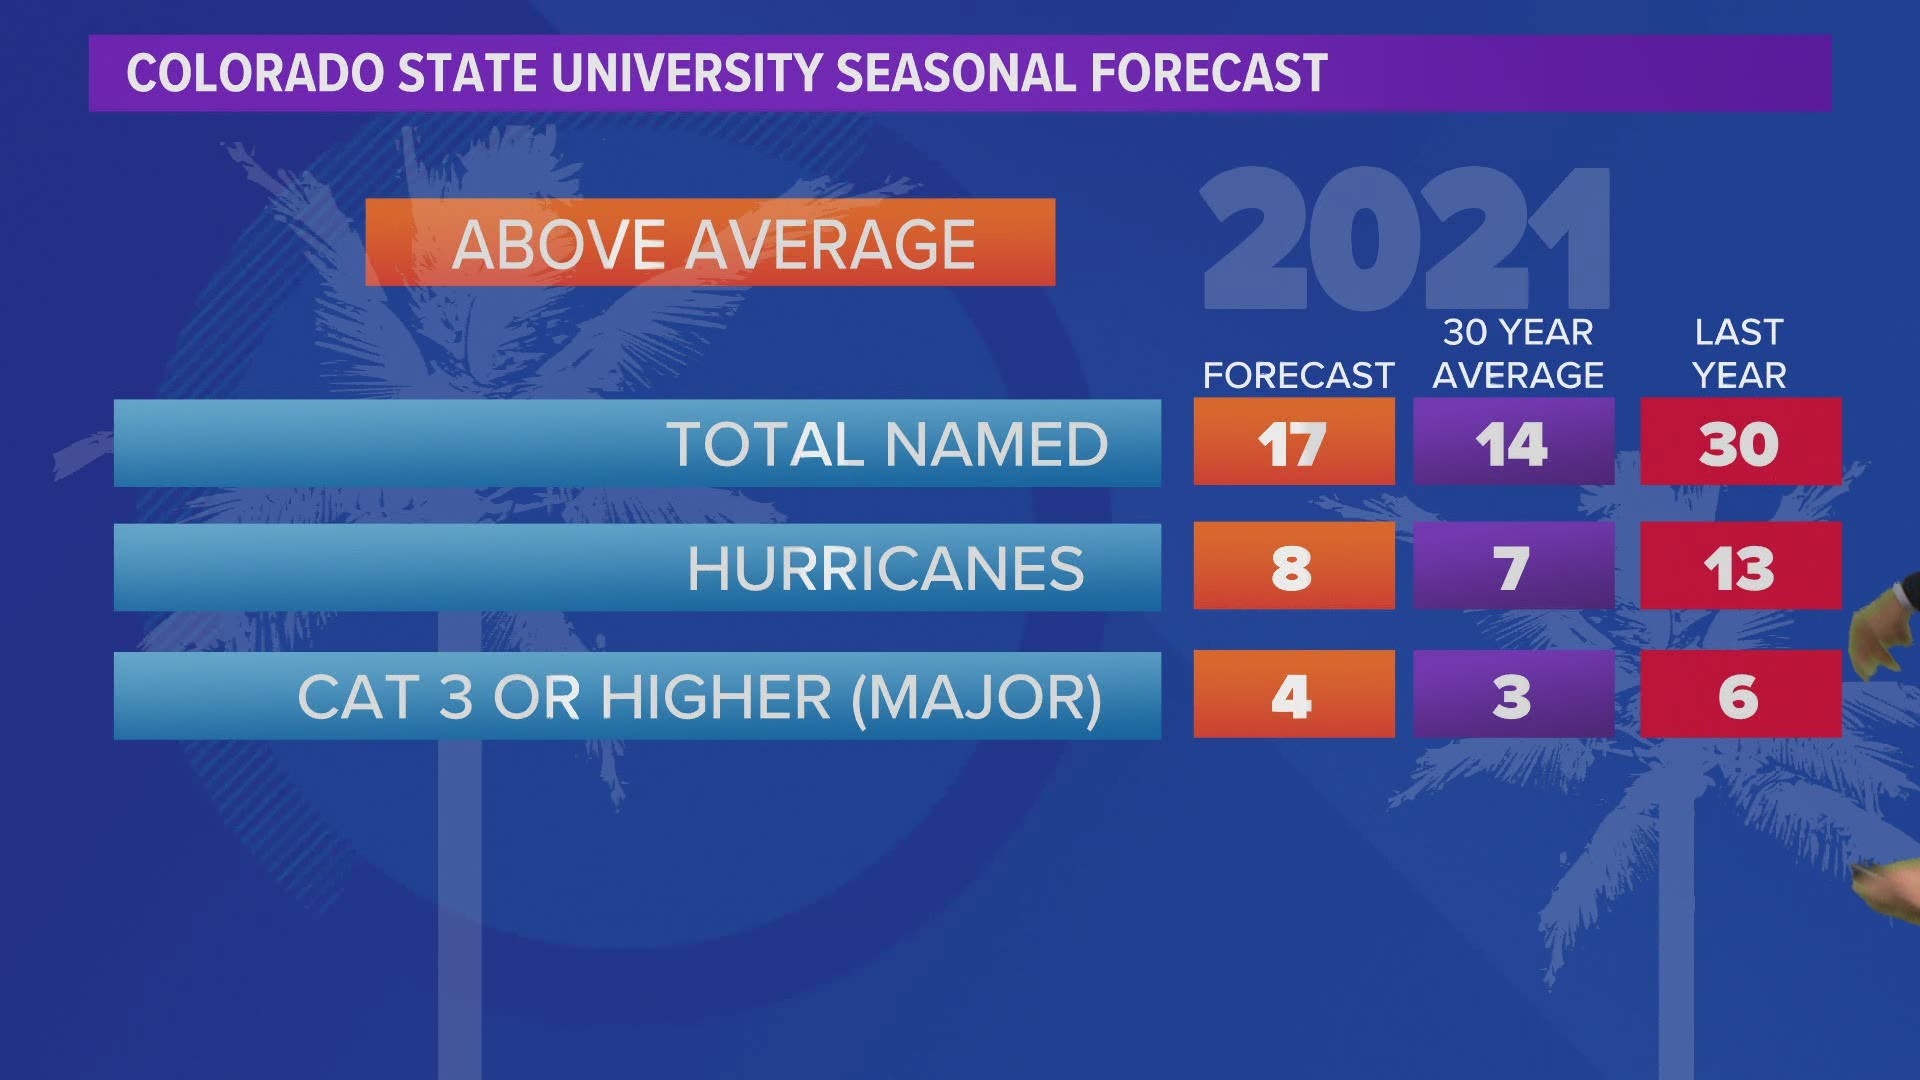 The experts at Colorado State are predicting 17 named storms during the 2021 hurricane season. But KHOU11 Meteorologist David Paul says it's too soon to know.